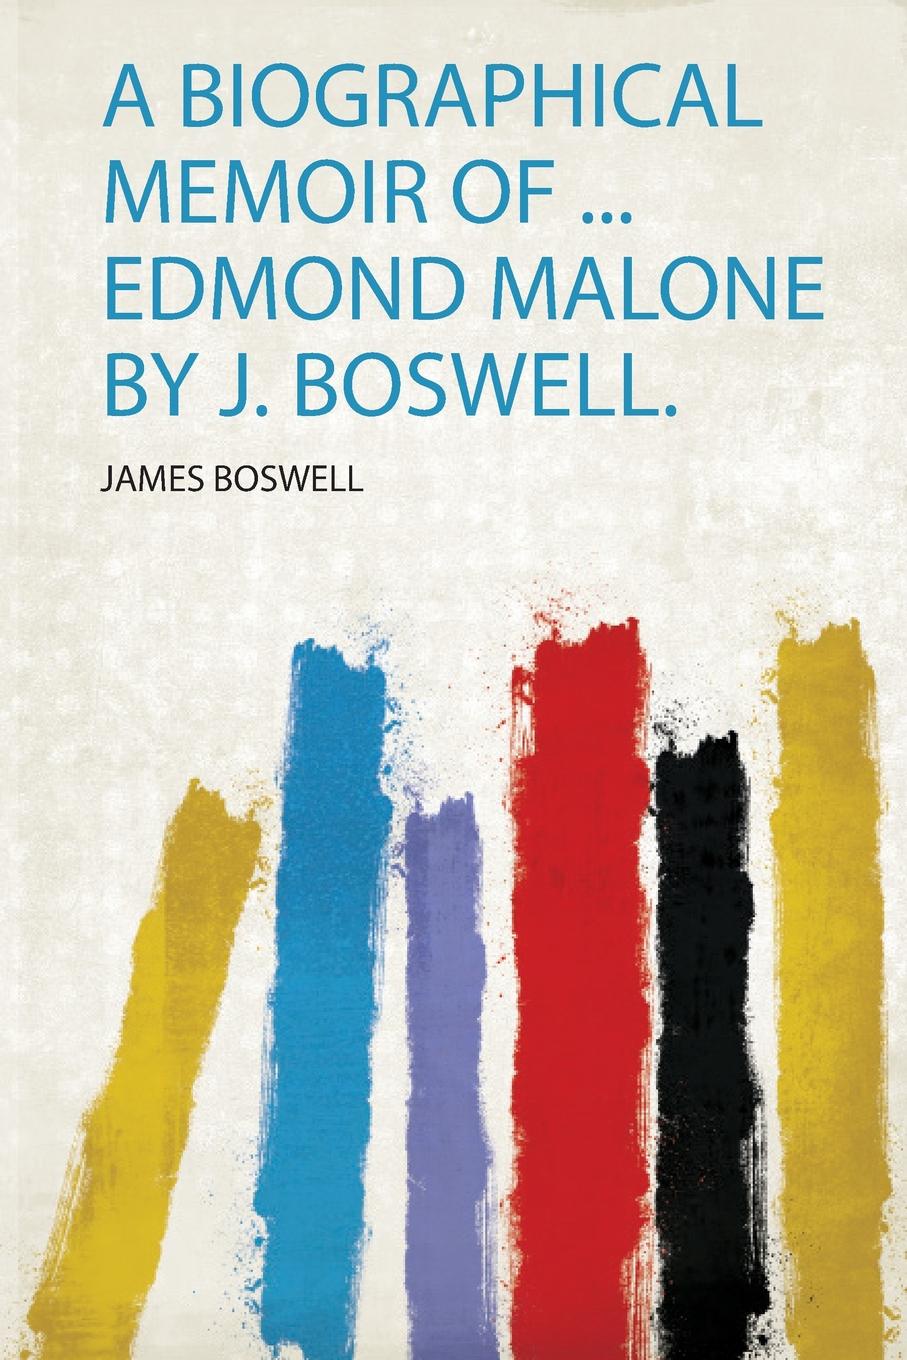 A Biographical Memoir of ... Edmond Malone by J. Boswell.